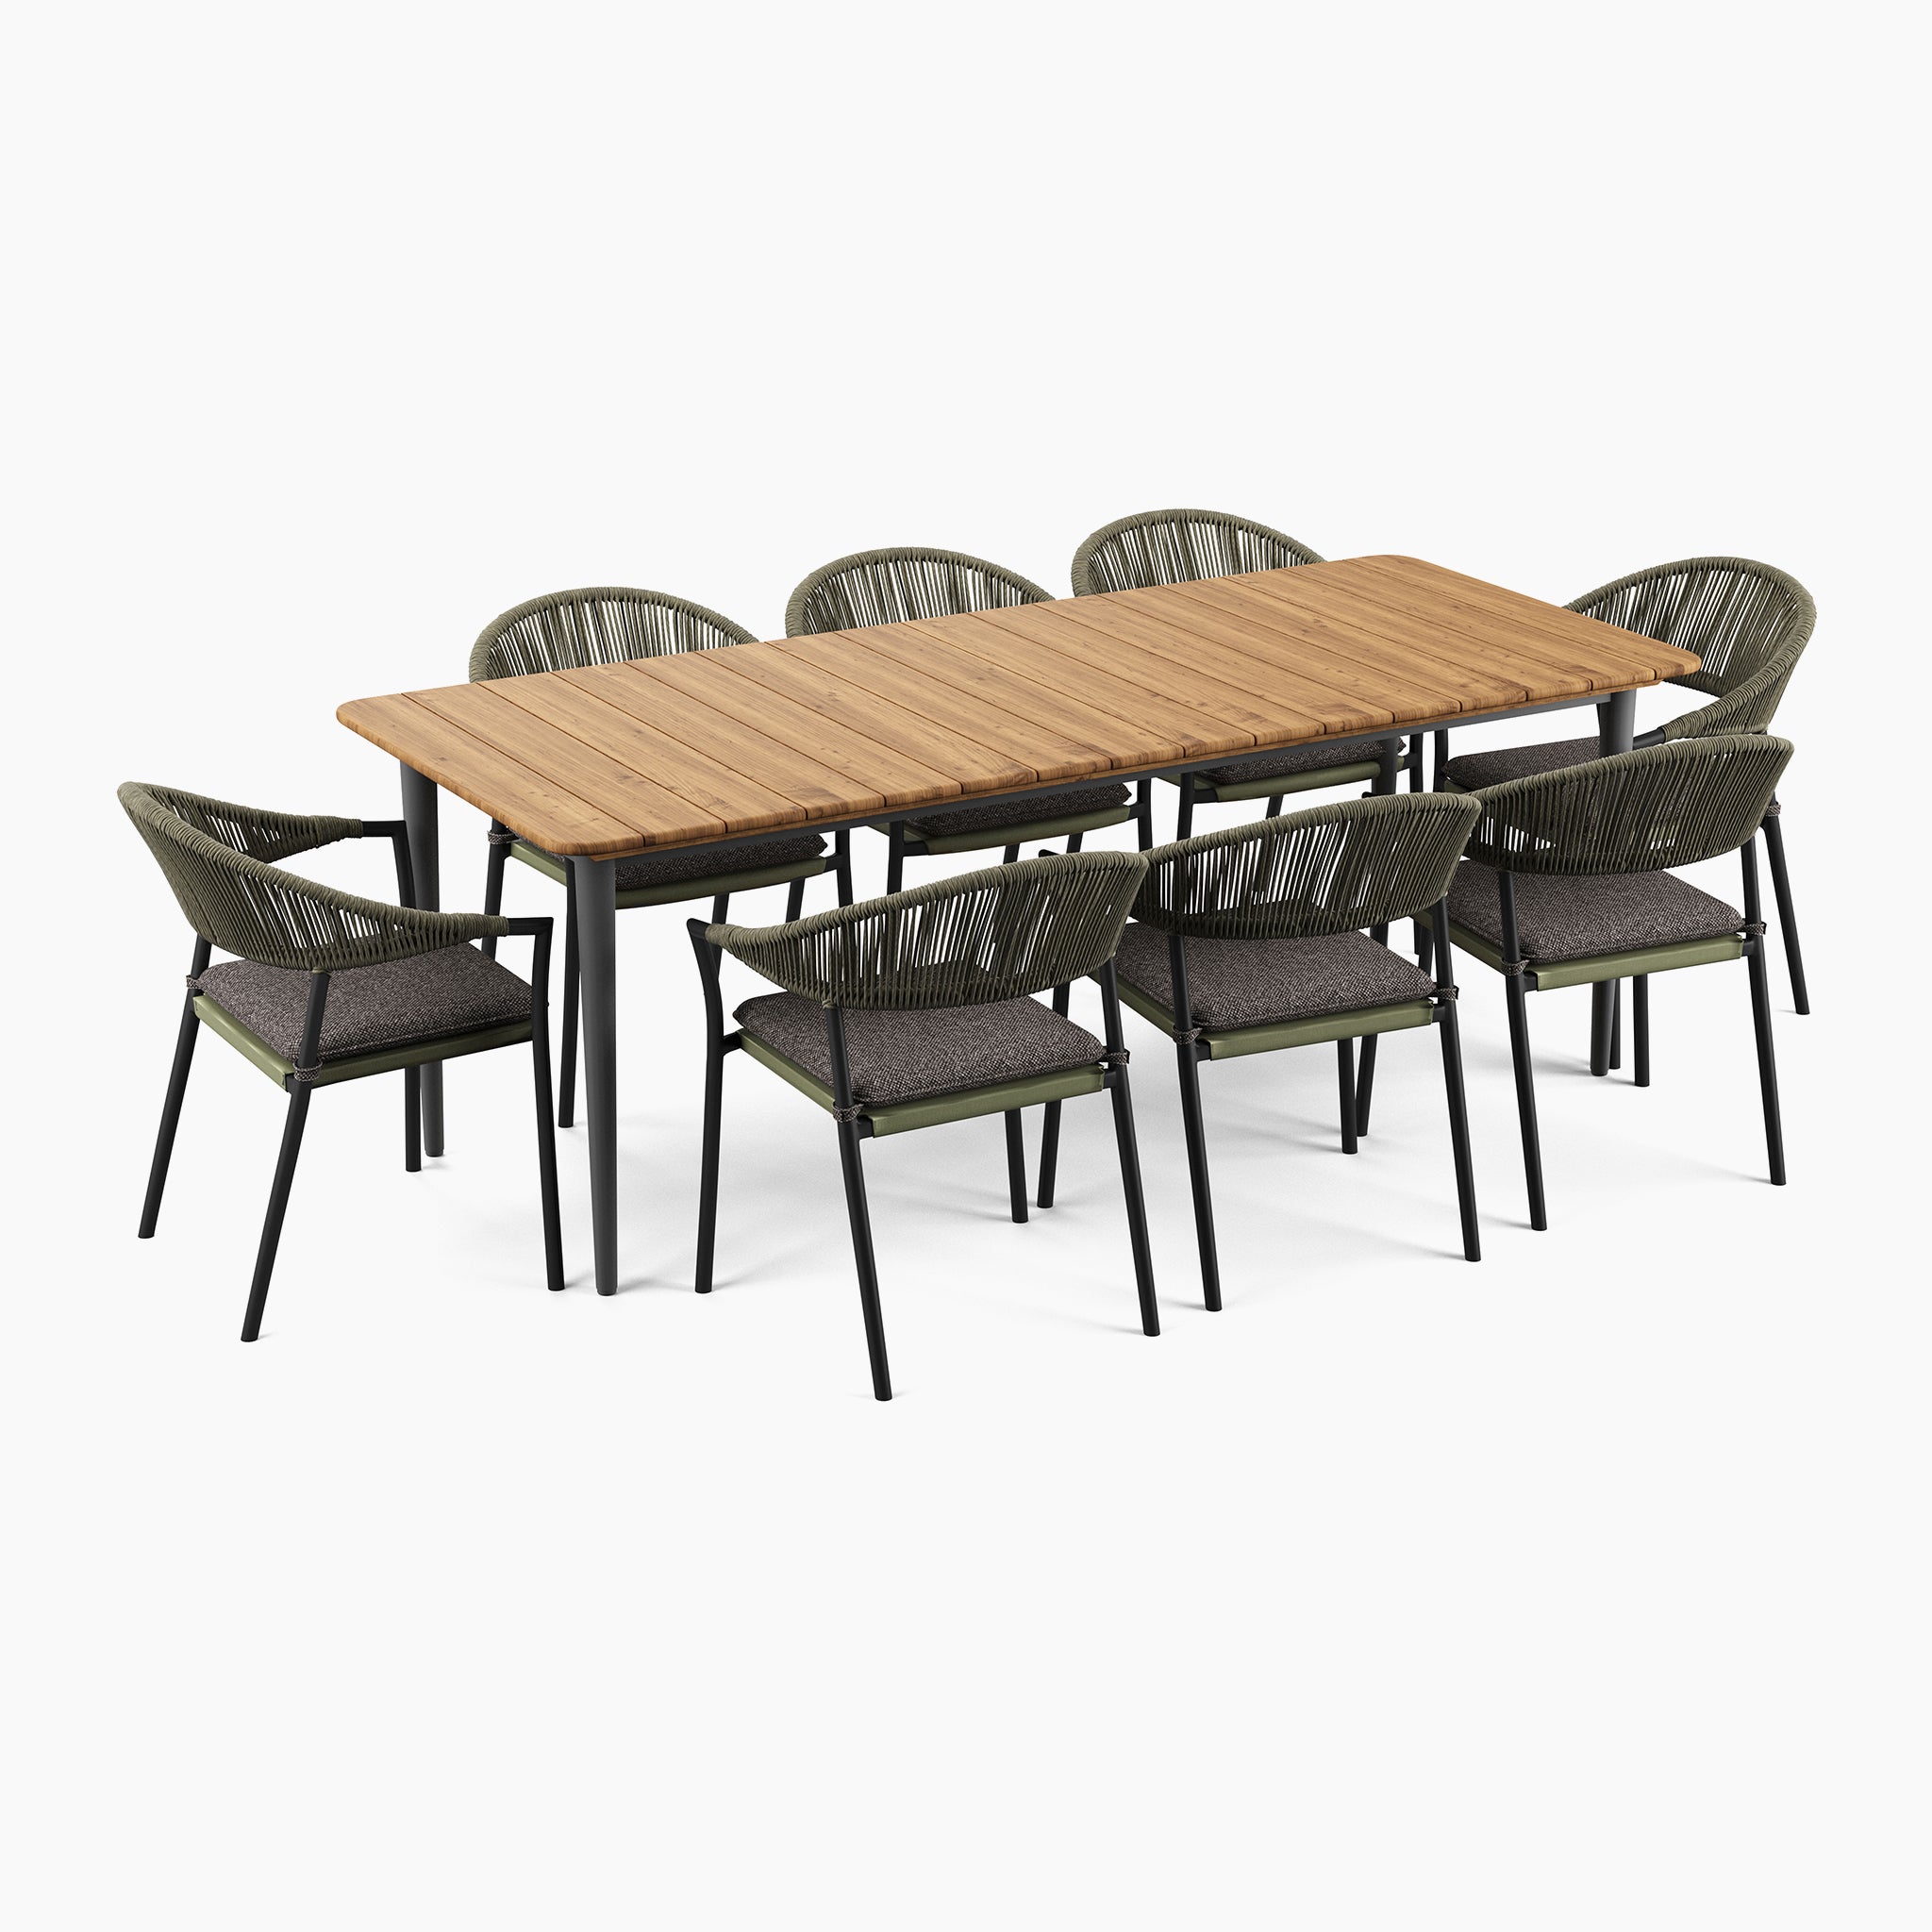 Cloverly 8 Seat Rectangular Dining with Teak Table in Olive Green